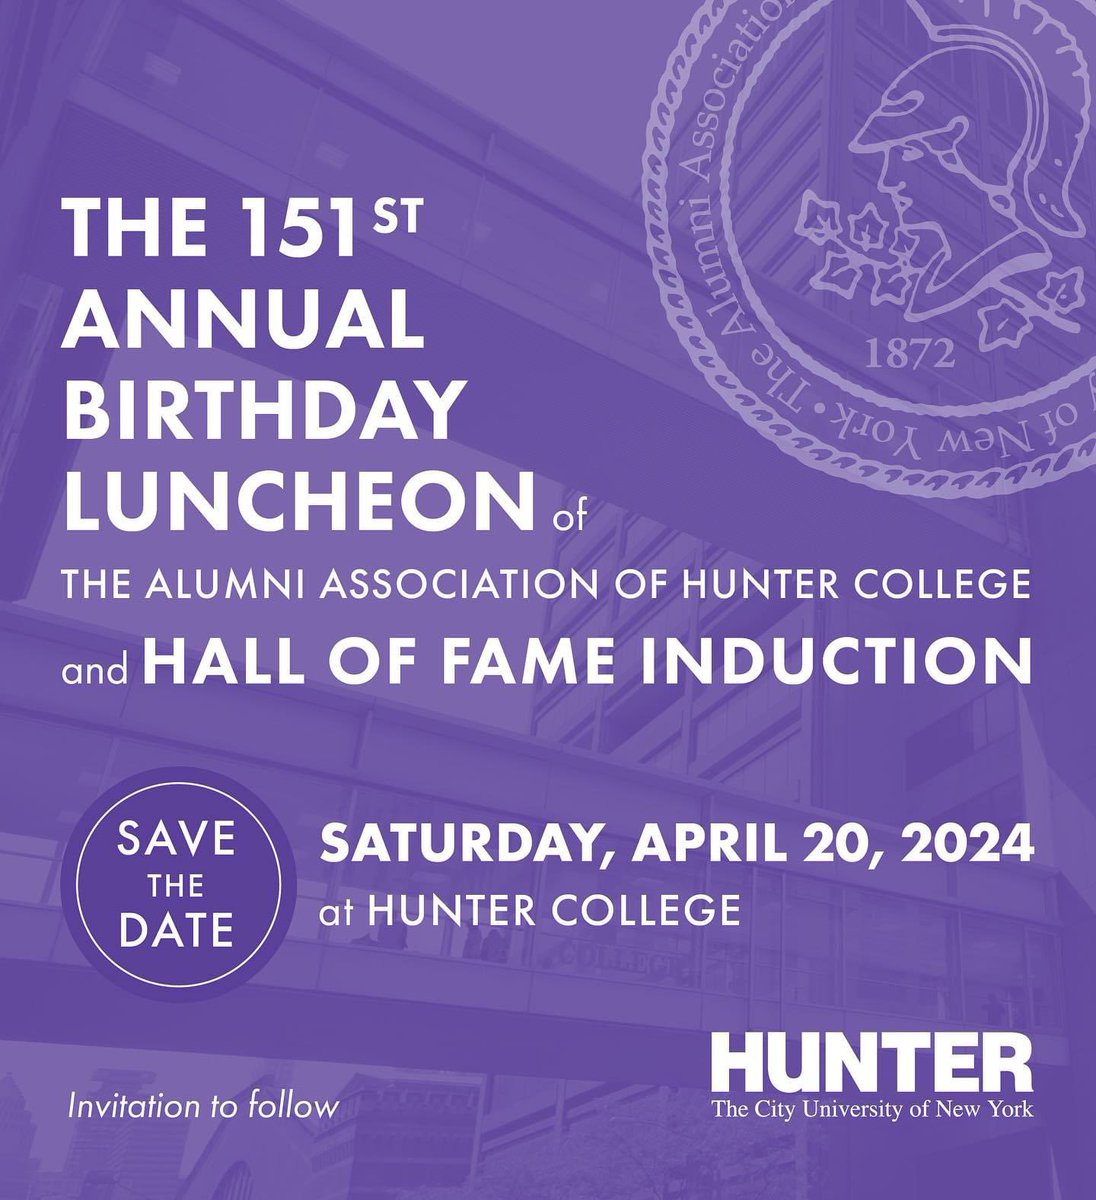 I’m deeply honored to be inducted into the @HunterCollege Hall of Fame. My alma mater took a chance on me when few other schools would. I regret not being there in person. 💜